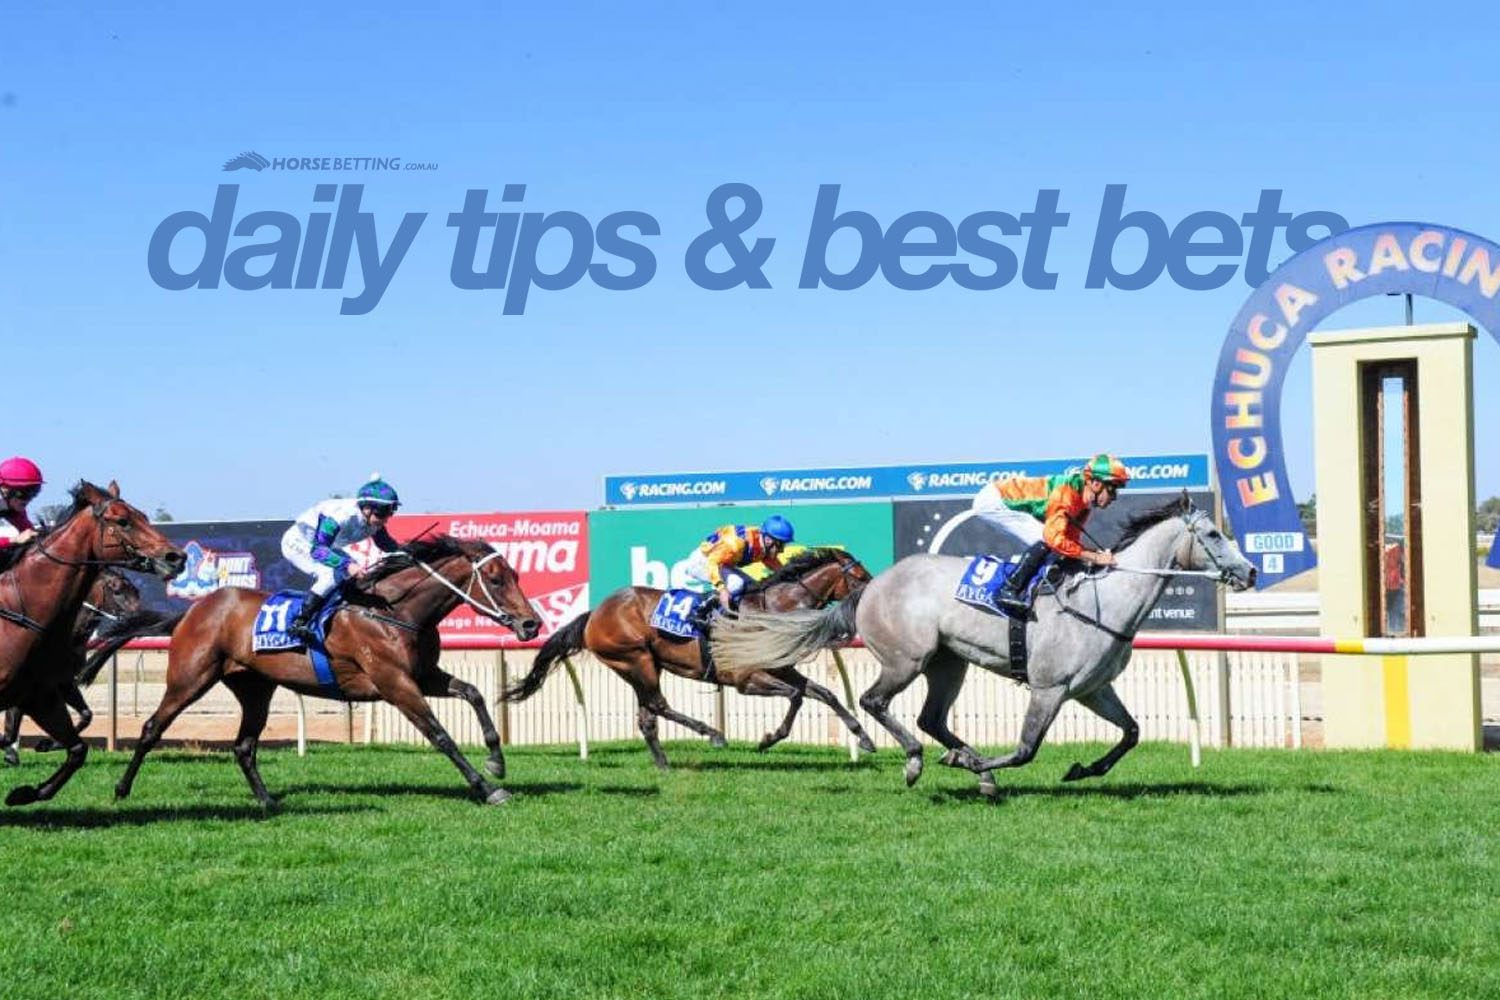 Thursday horse racing tips and best bets